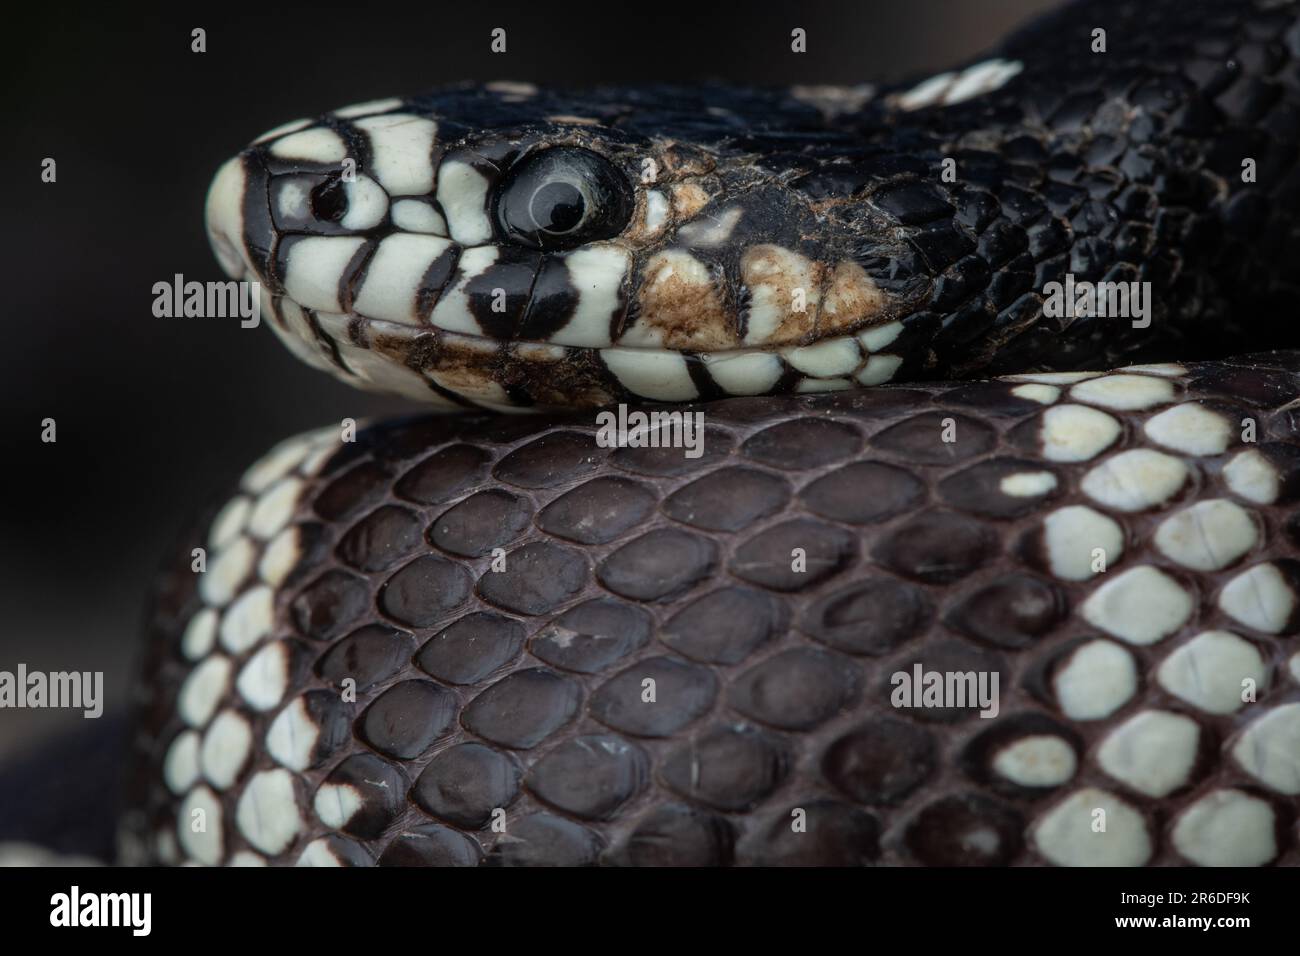 https://c8.alamy.com/comp/2R6DF9K/a-possible-case-of-snake-fungal-disease-caused-by-ophidiomyces-ophidiicola-in-a-california-kingsnake-lampropeltis-californiae-in-california-2R6DF9K.jpg